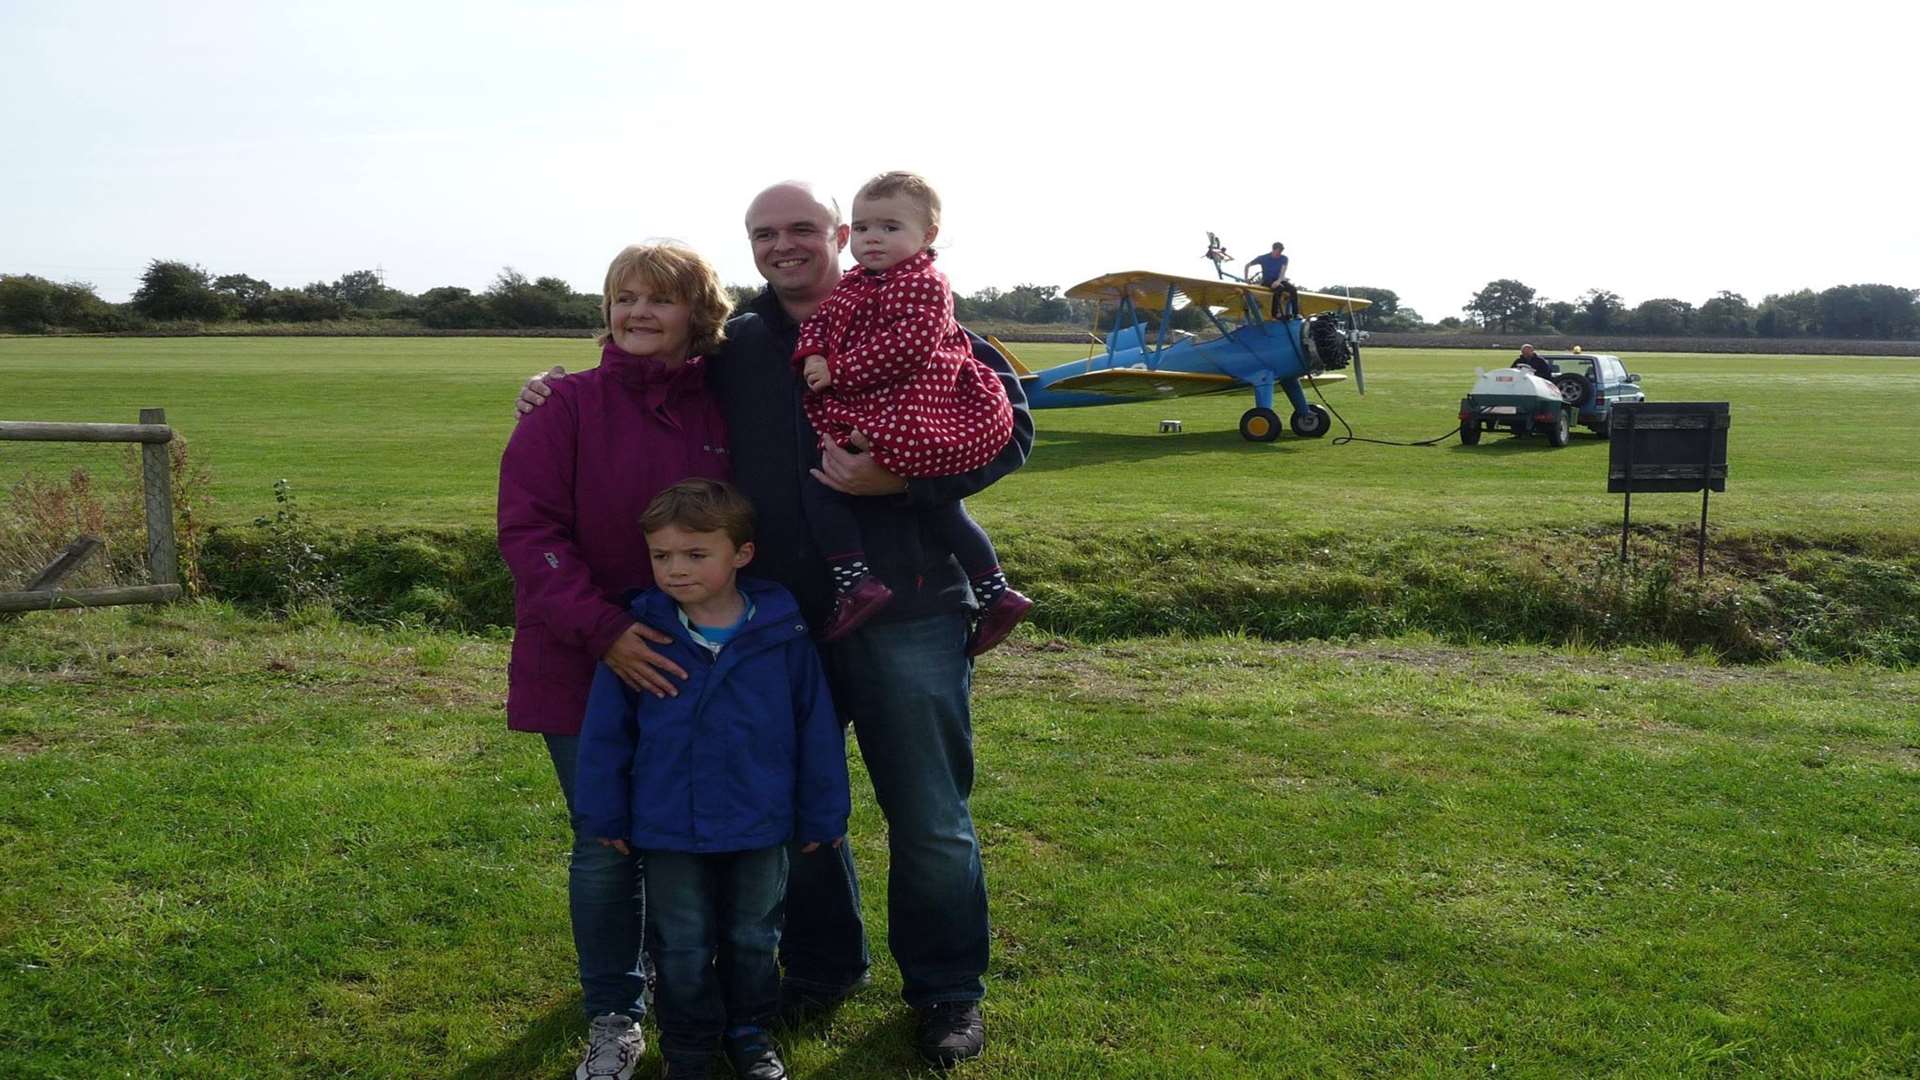 Joanne Aston, pictured with her family, took on various challenges after her diagnosis, including a sponsored wingwalk.